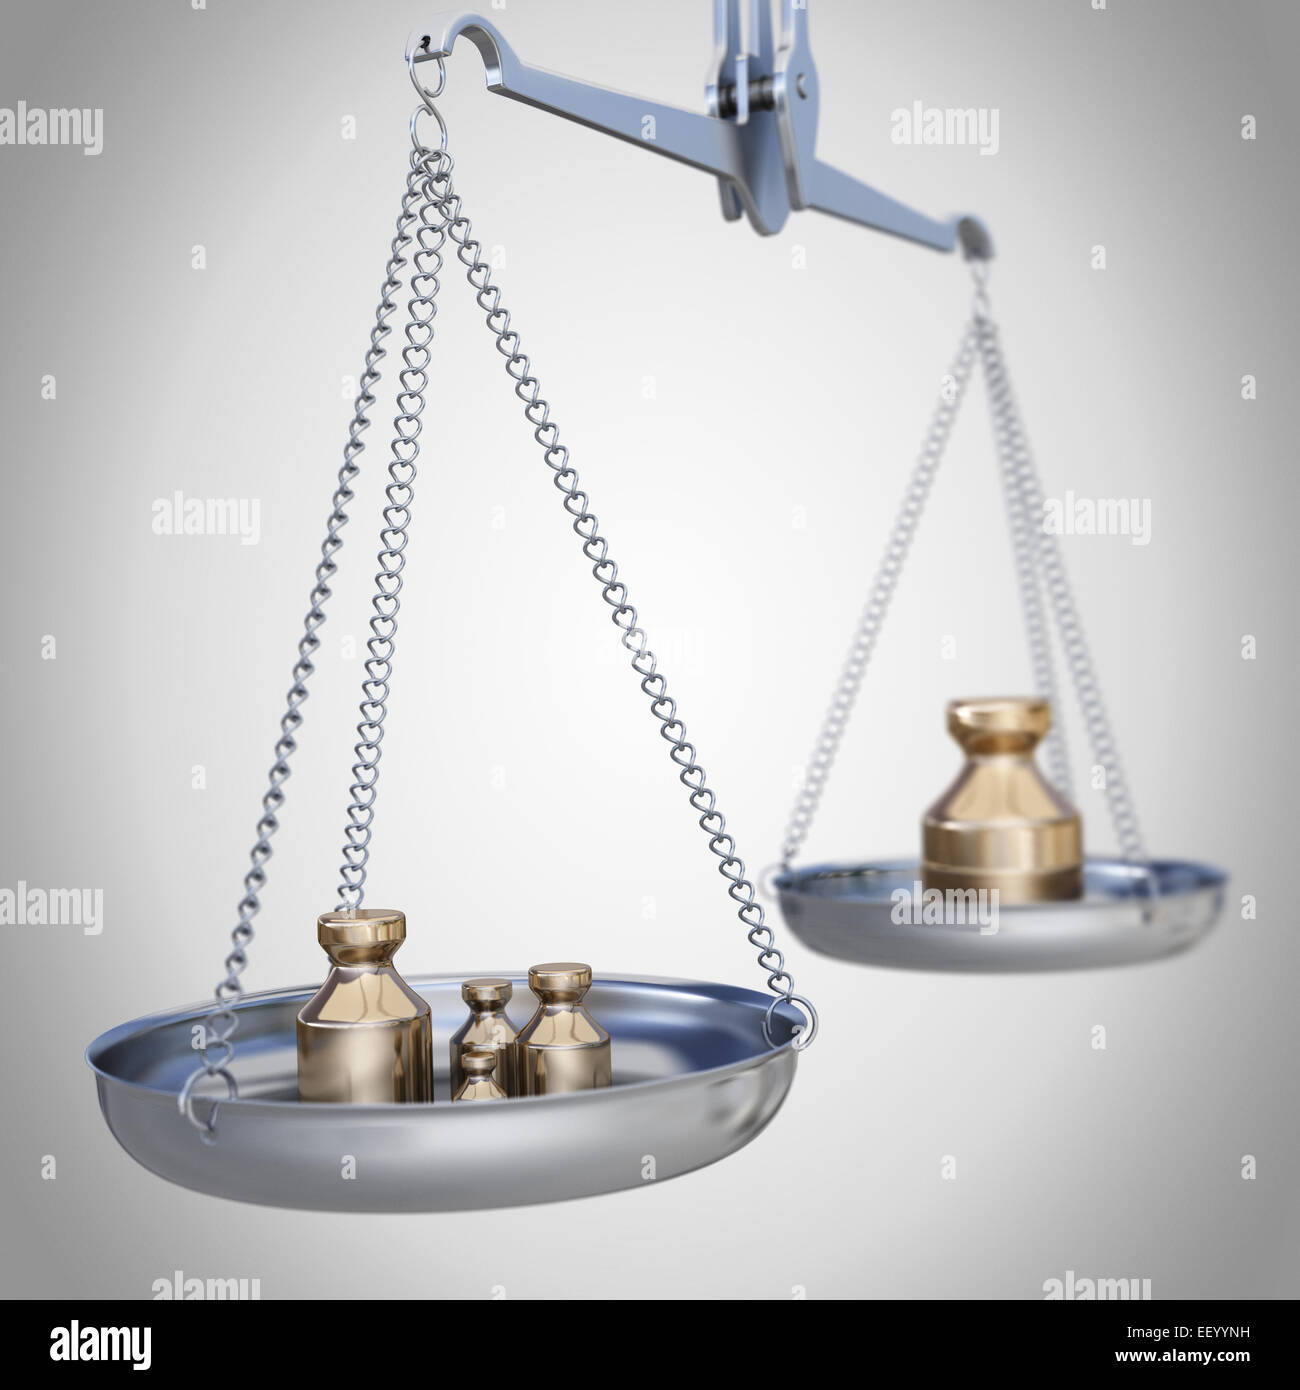 https://c8.alamy.com/comp/EEYYNH/silver-weighing-scale-with-golden-weights-EEYYNH.jpg